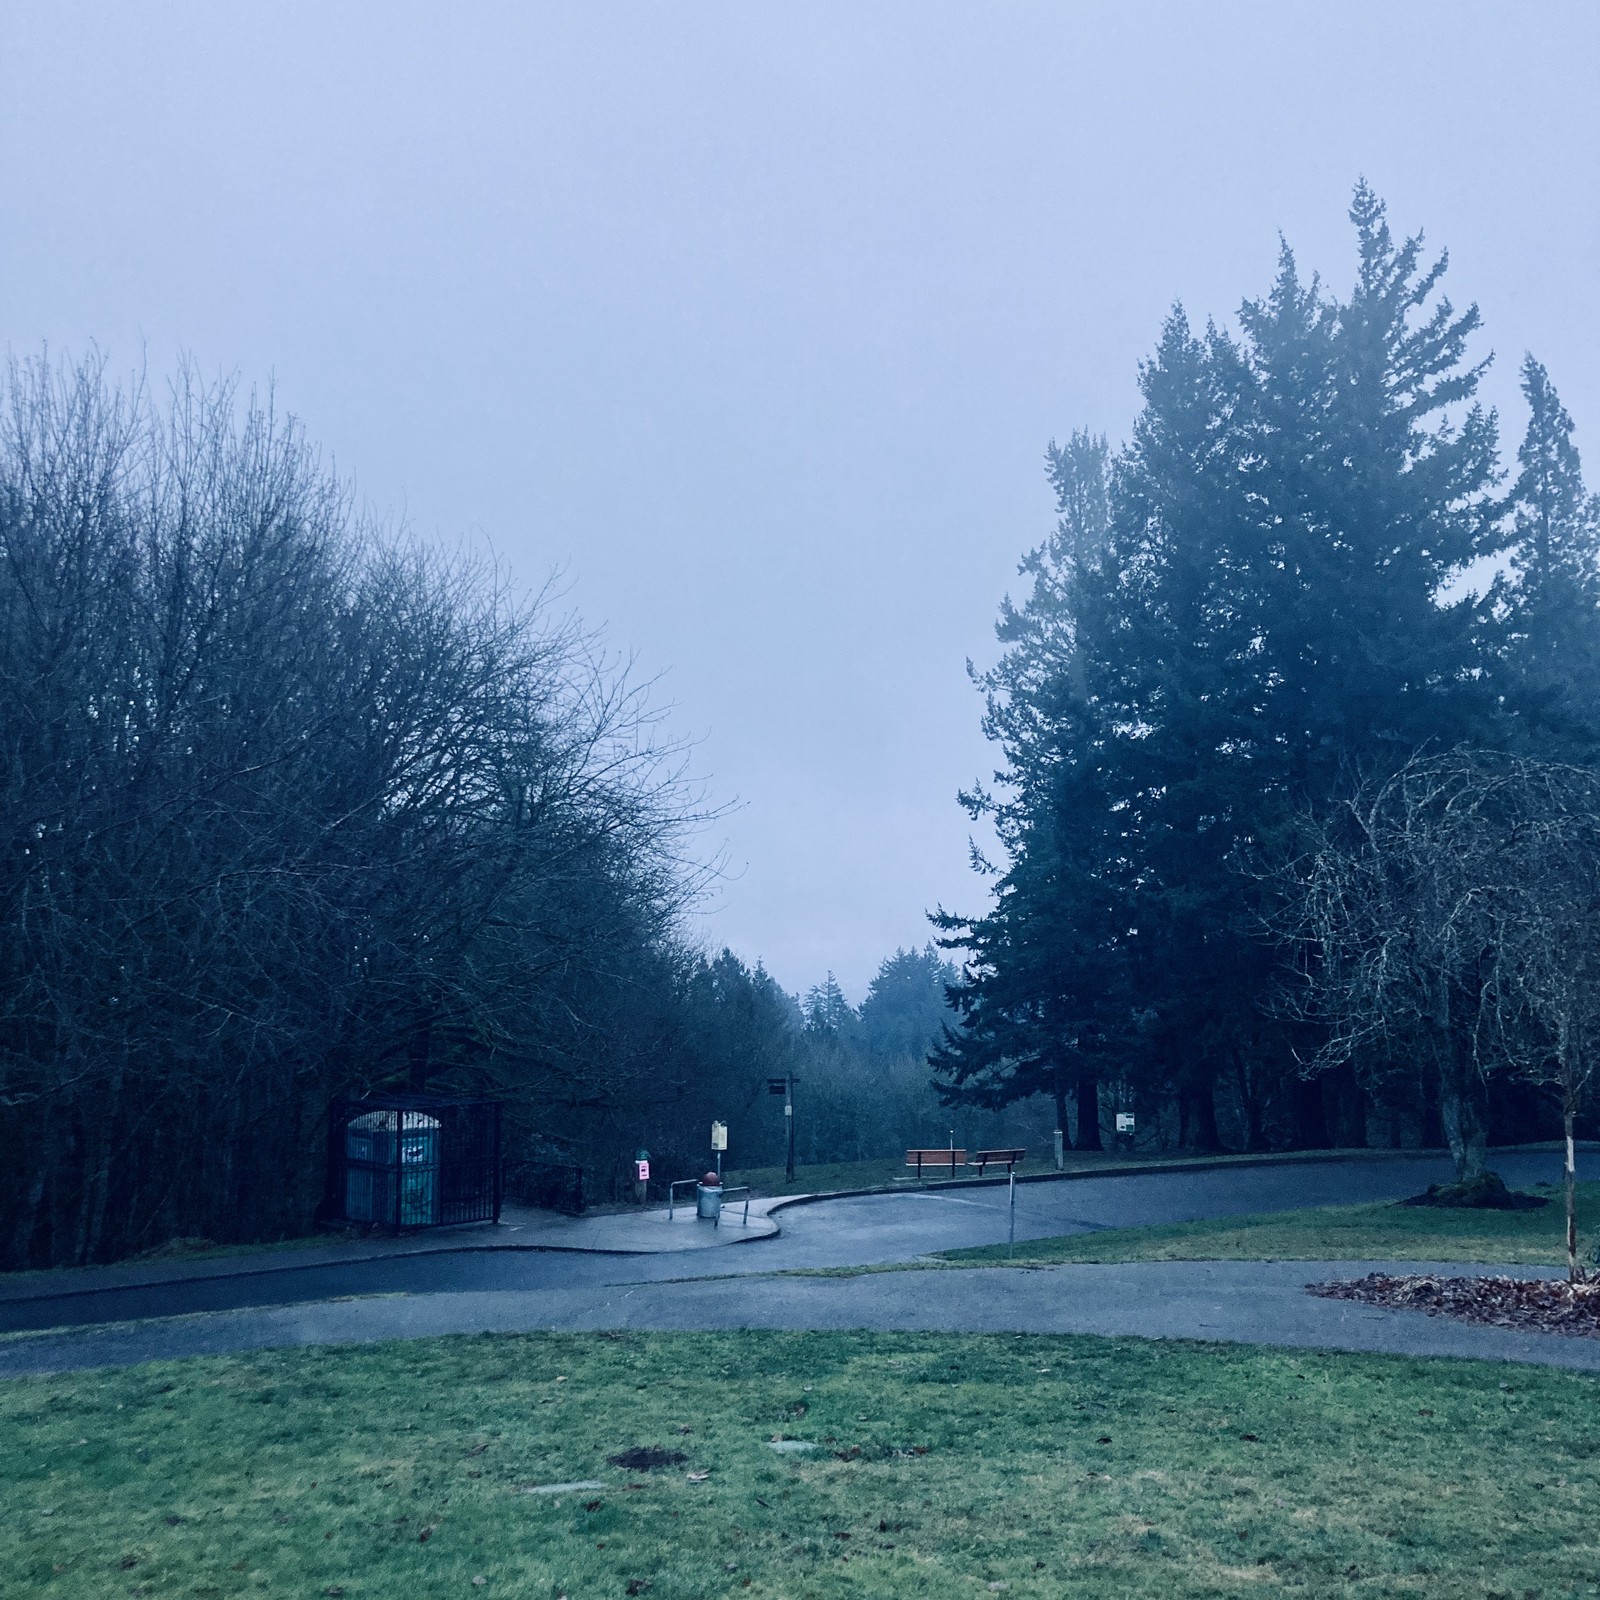 View from Council Crest toward Mt. Hood, which is not visible. A heavy mist-slash-fog hangs near overhead with a light rain, under a blank sky with the texture of wool. It is early morning, just past sunrise on the shortest day of the year. The scene has a chilly, dim, pagan vibe